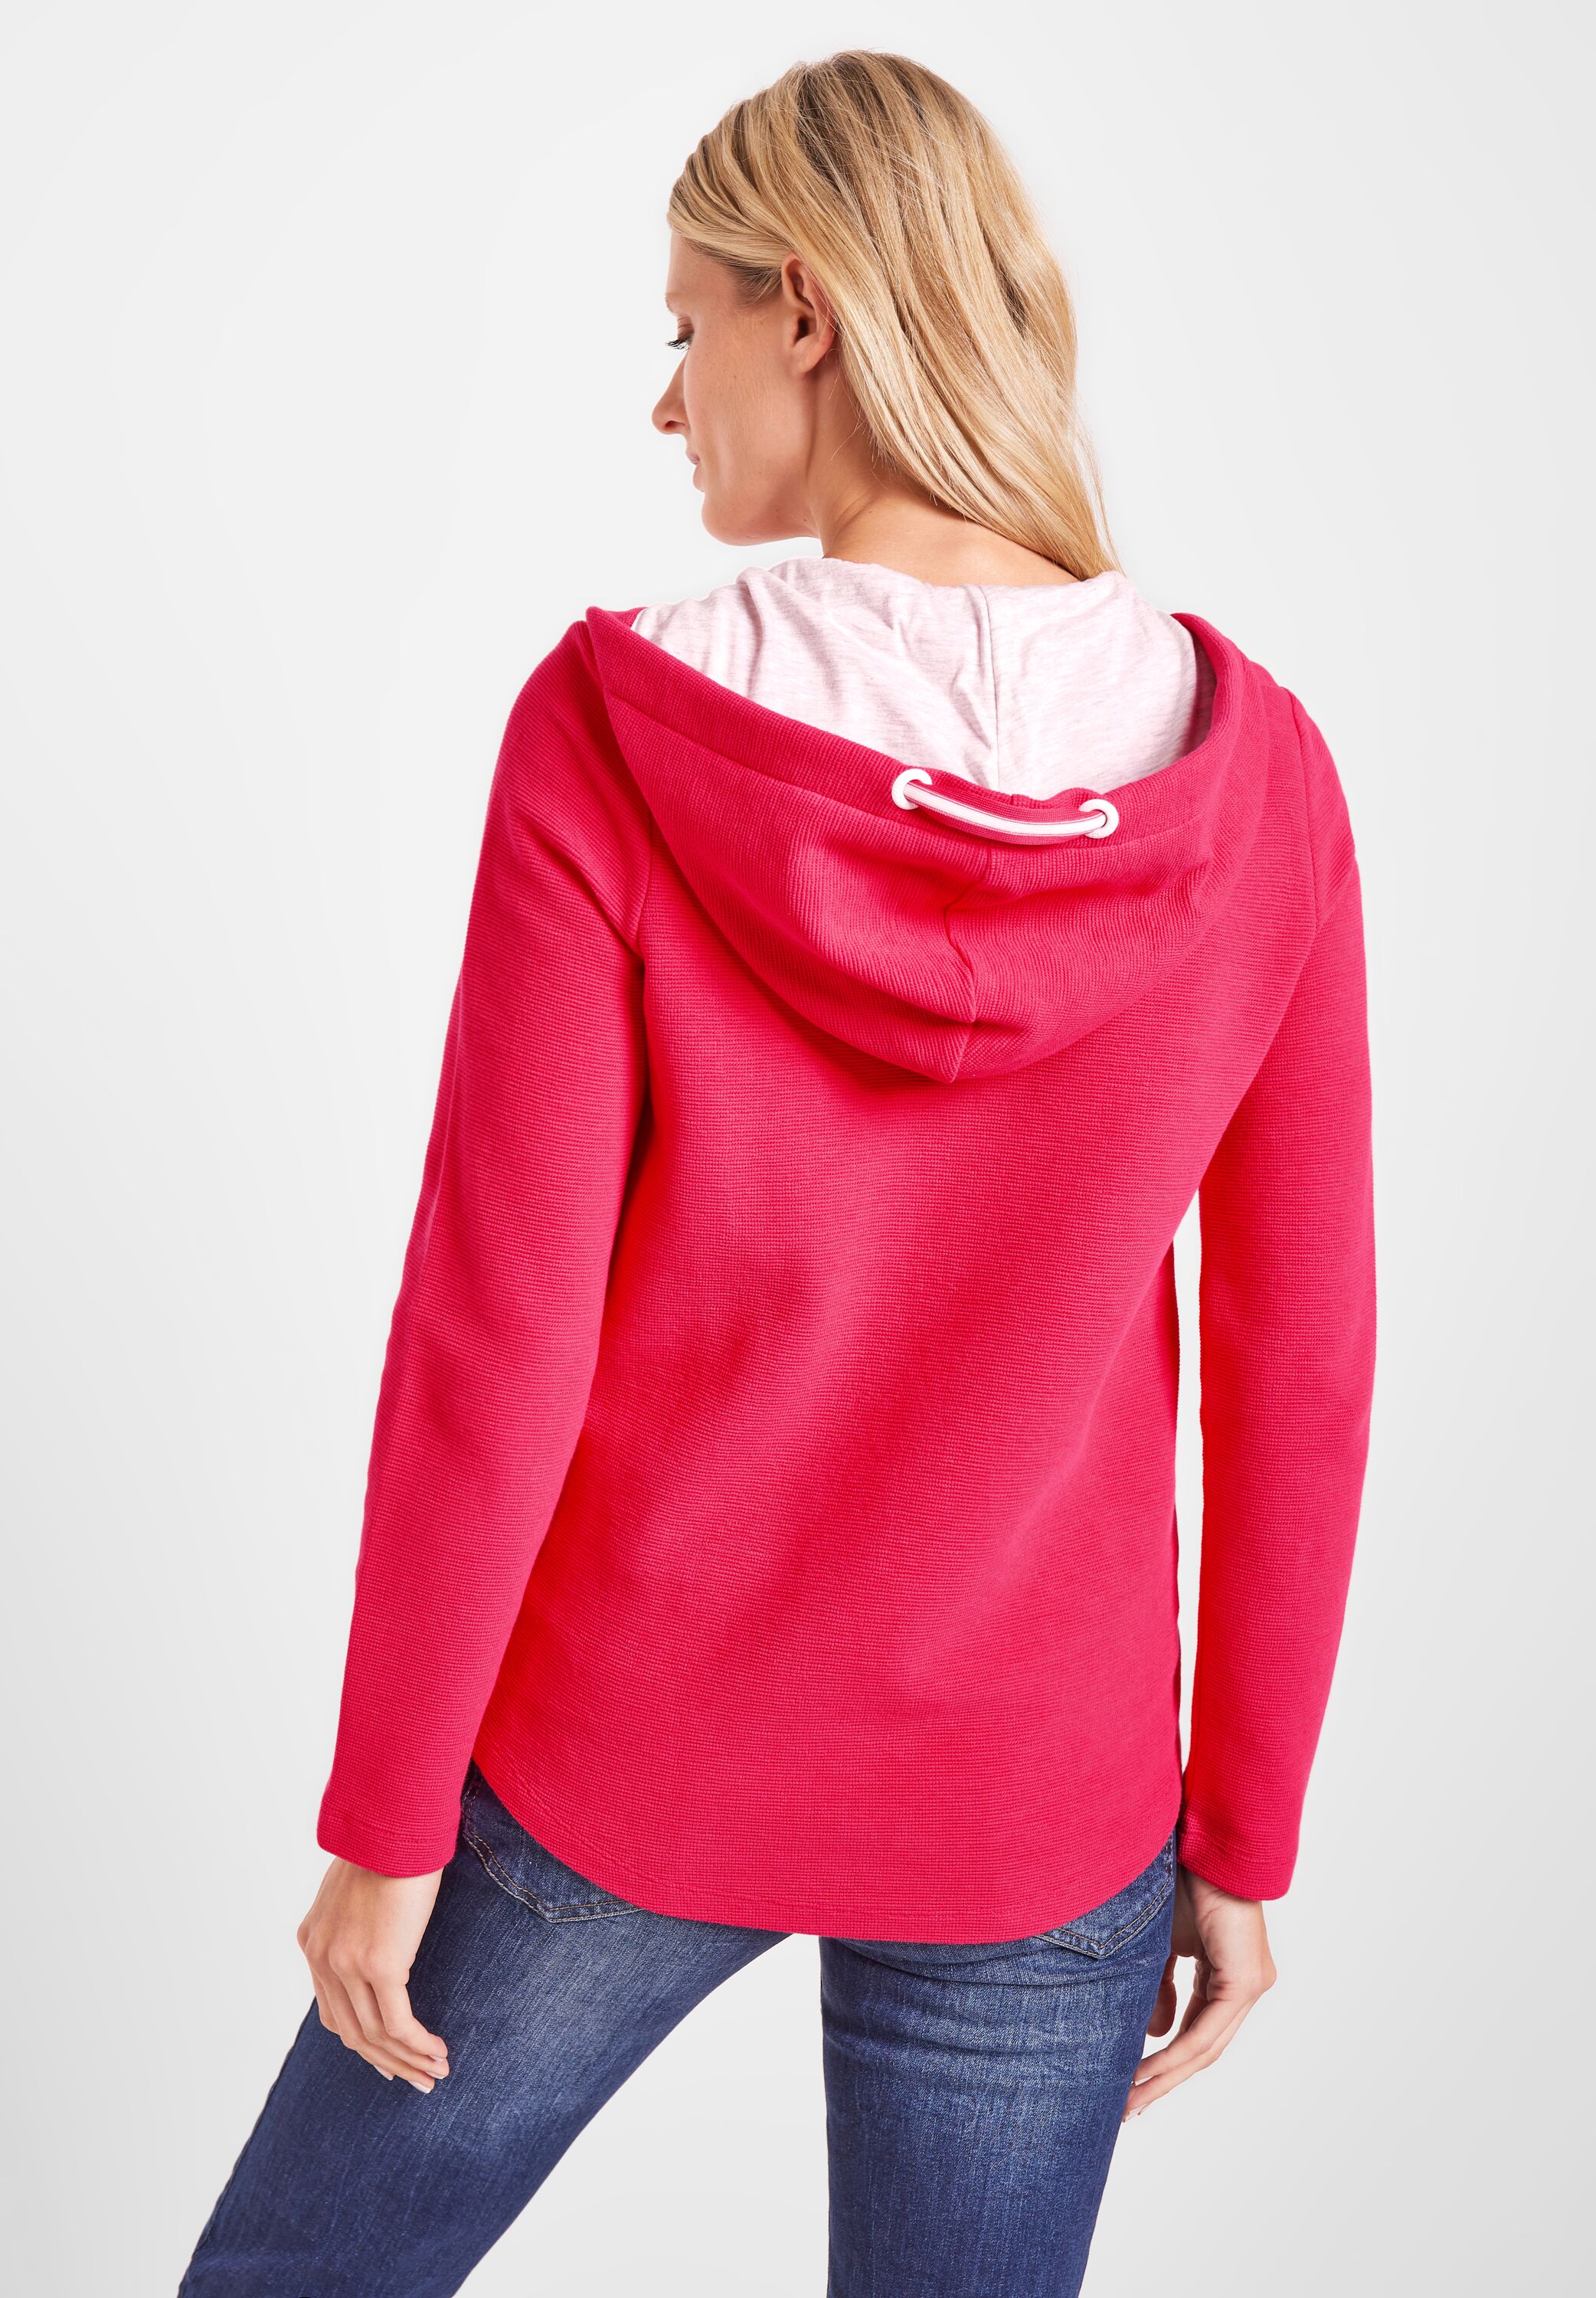 CONCEPT im Mode Strawberry B319398-14472 CECIL SALE reduziert - in Red Shirtjacke